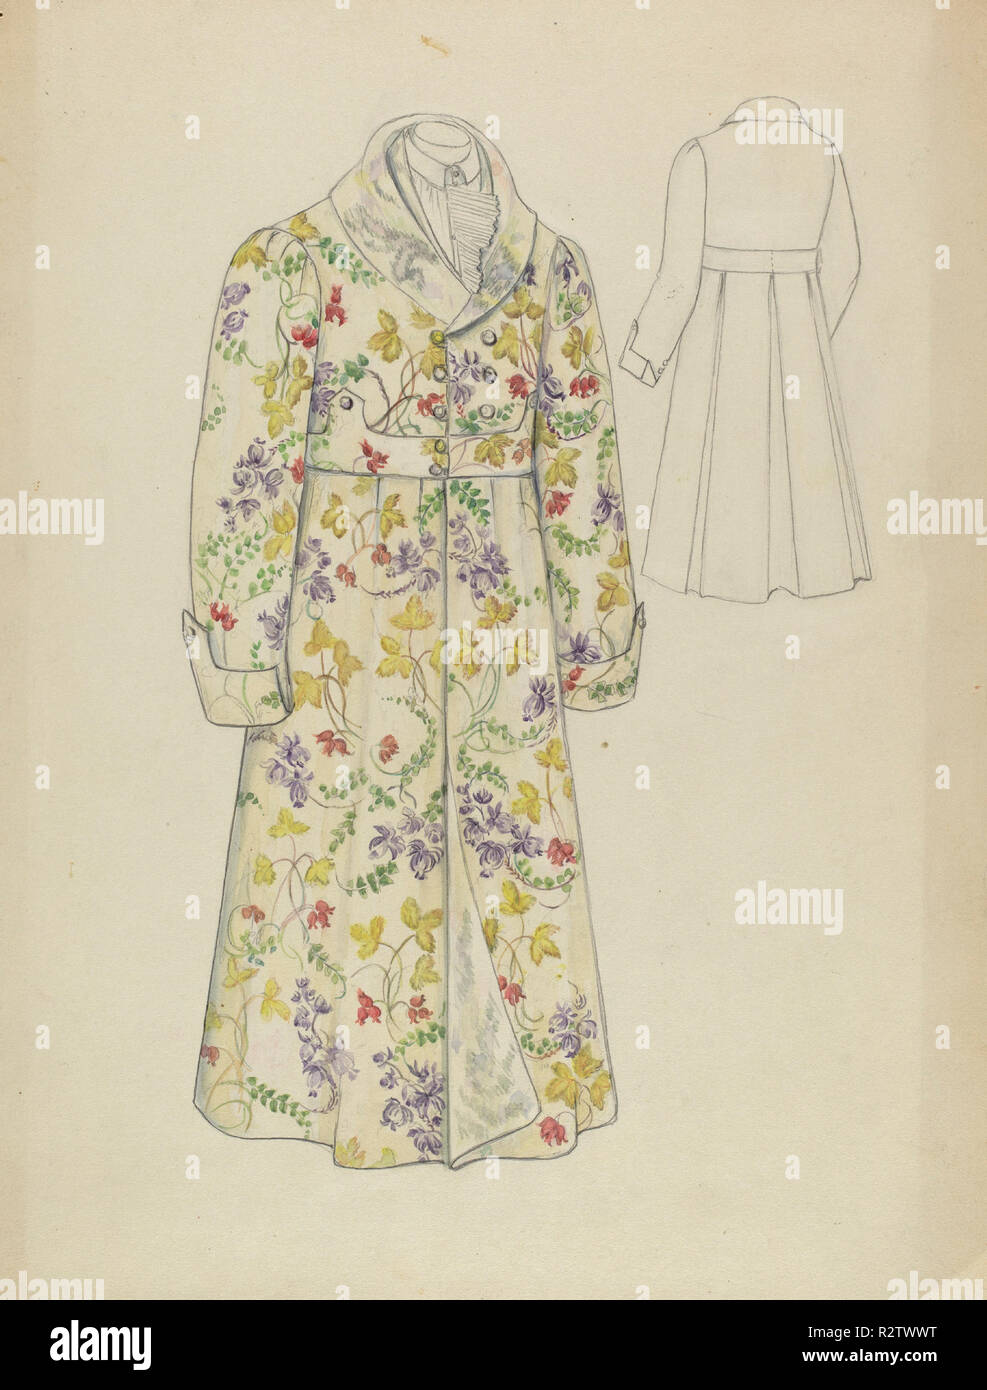 Man's Dressing Gown. Dated: c. 1936. Dimensions: overall: 29.5 x 23 cm (11 5/8 x 9 1/16 in.). Medium: watercolor and graphite on paperboard. Museum: National Gallery of Art, Washington DC. Author: Jessie M. Benge. Stock Photo